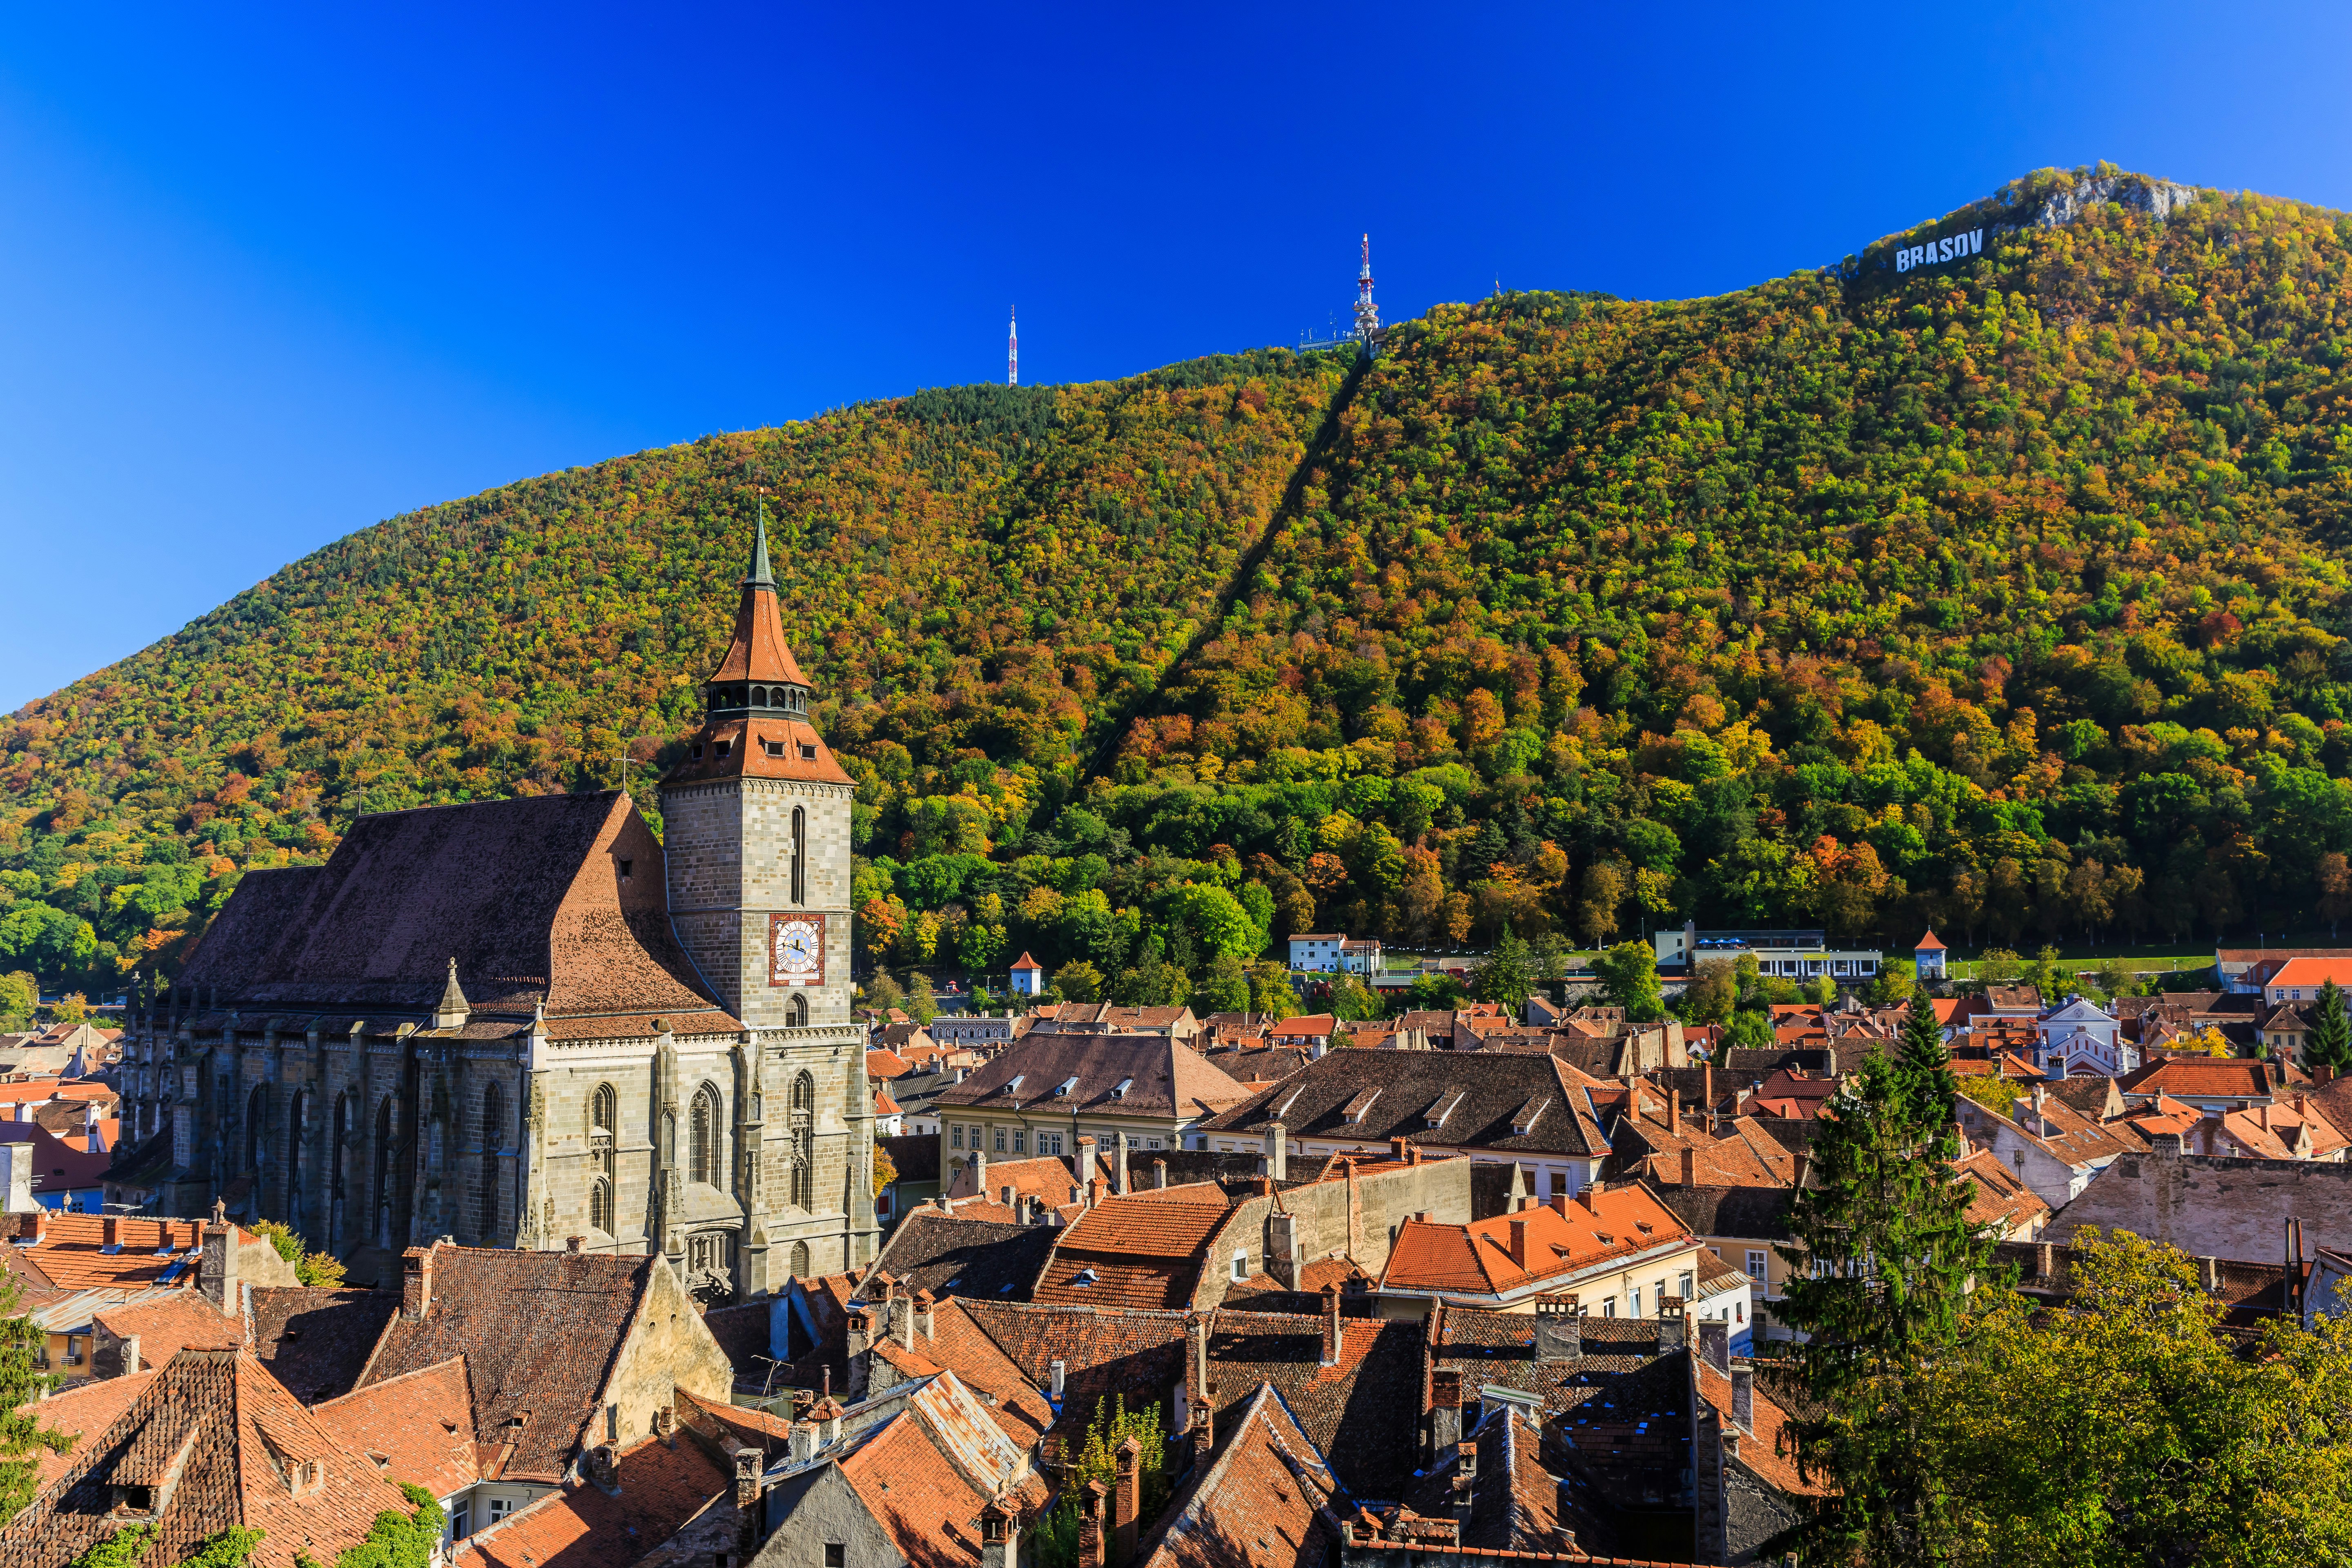 Brasov and its most important landmark, the Black Church towers over the old town. Transylvania, Romania.